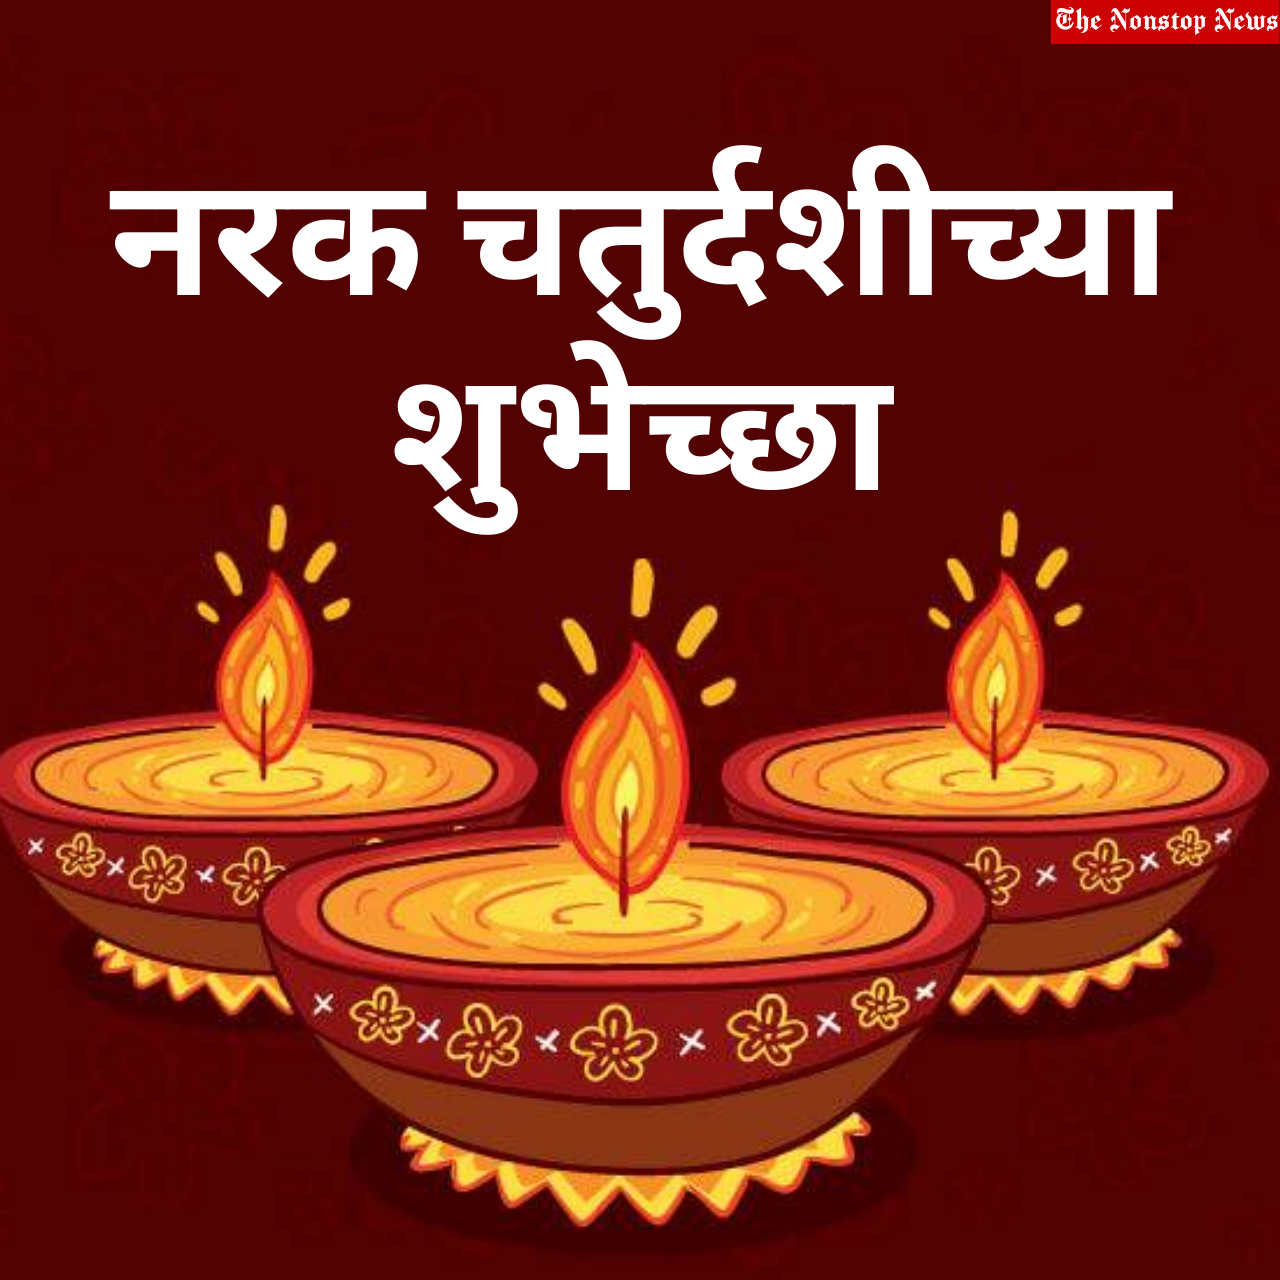 Narak Chaturdashi 2021 Marathi Wishes, Greetings, Messages, Quotes, and HD Images to Download